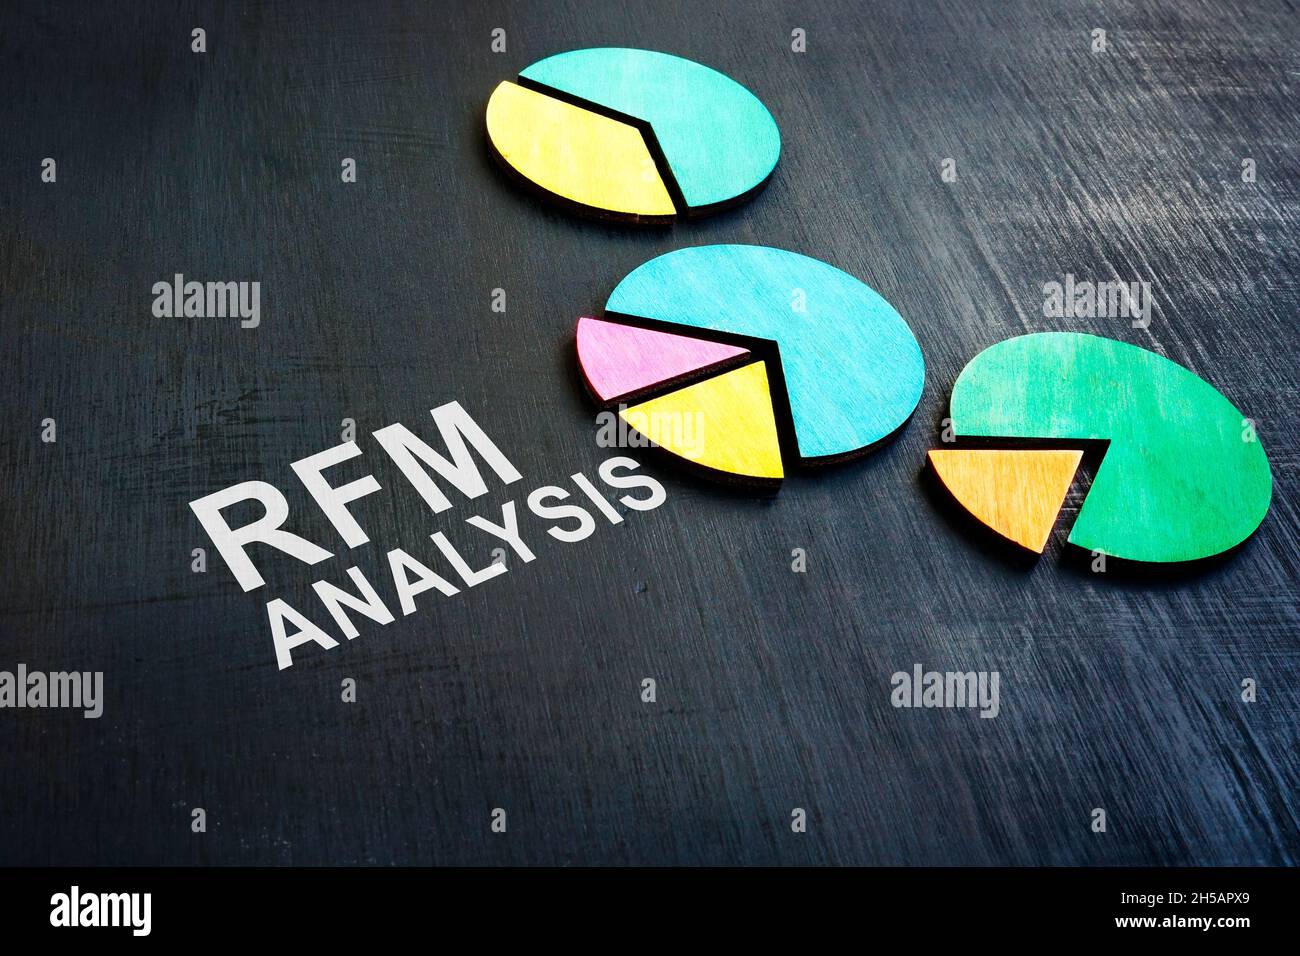 RFM Recency, Frequency, Monetary Analysis words and business charts. Stock Photo